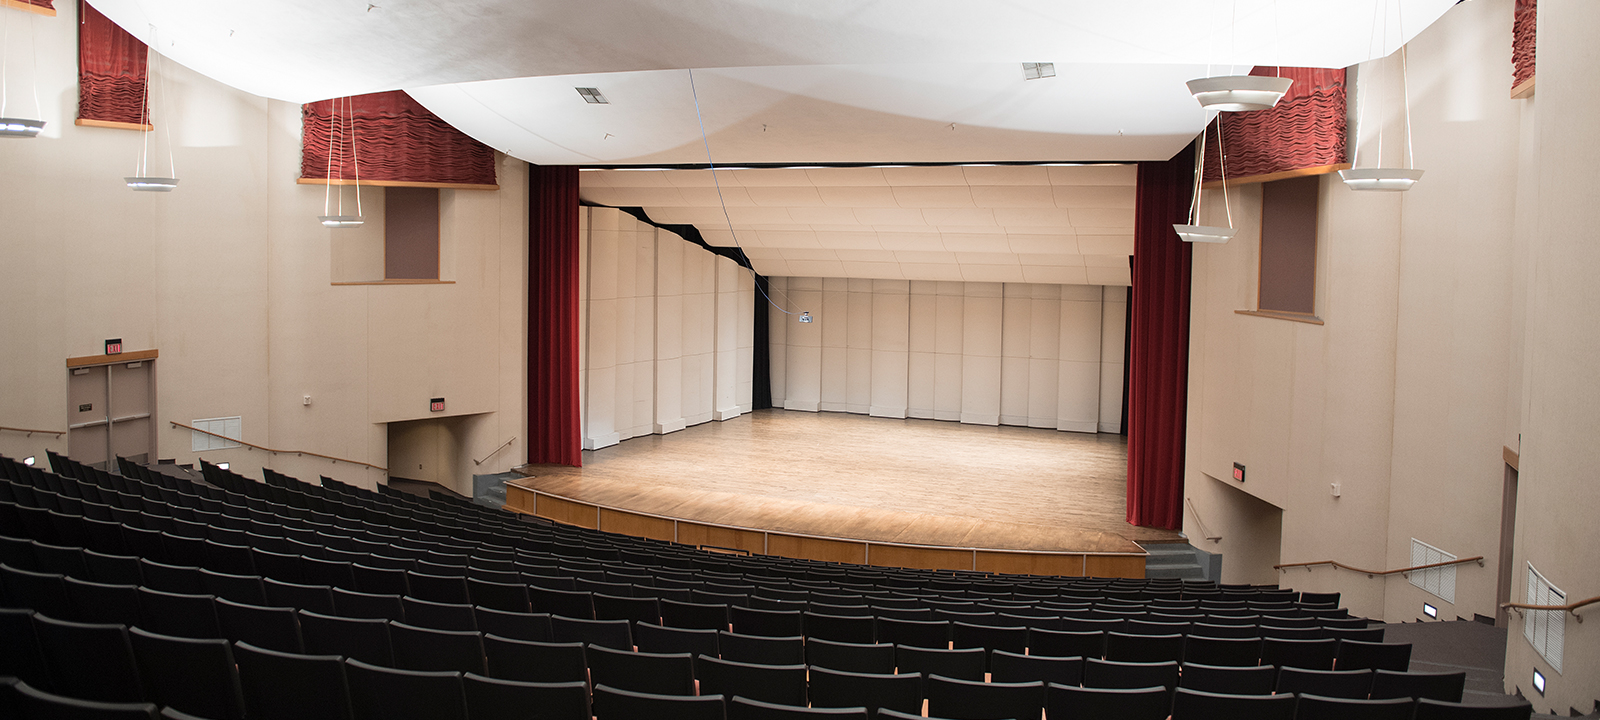 Roussel Hall hosts weekly concerts, dance performances and lectures. Inquire to rent the hall today.